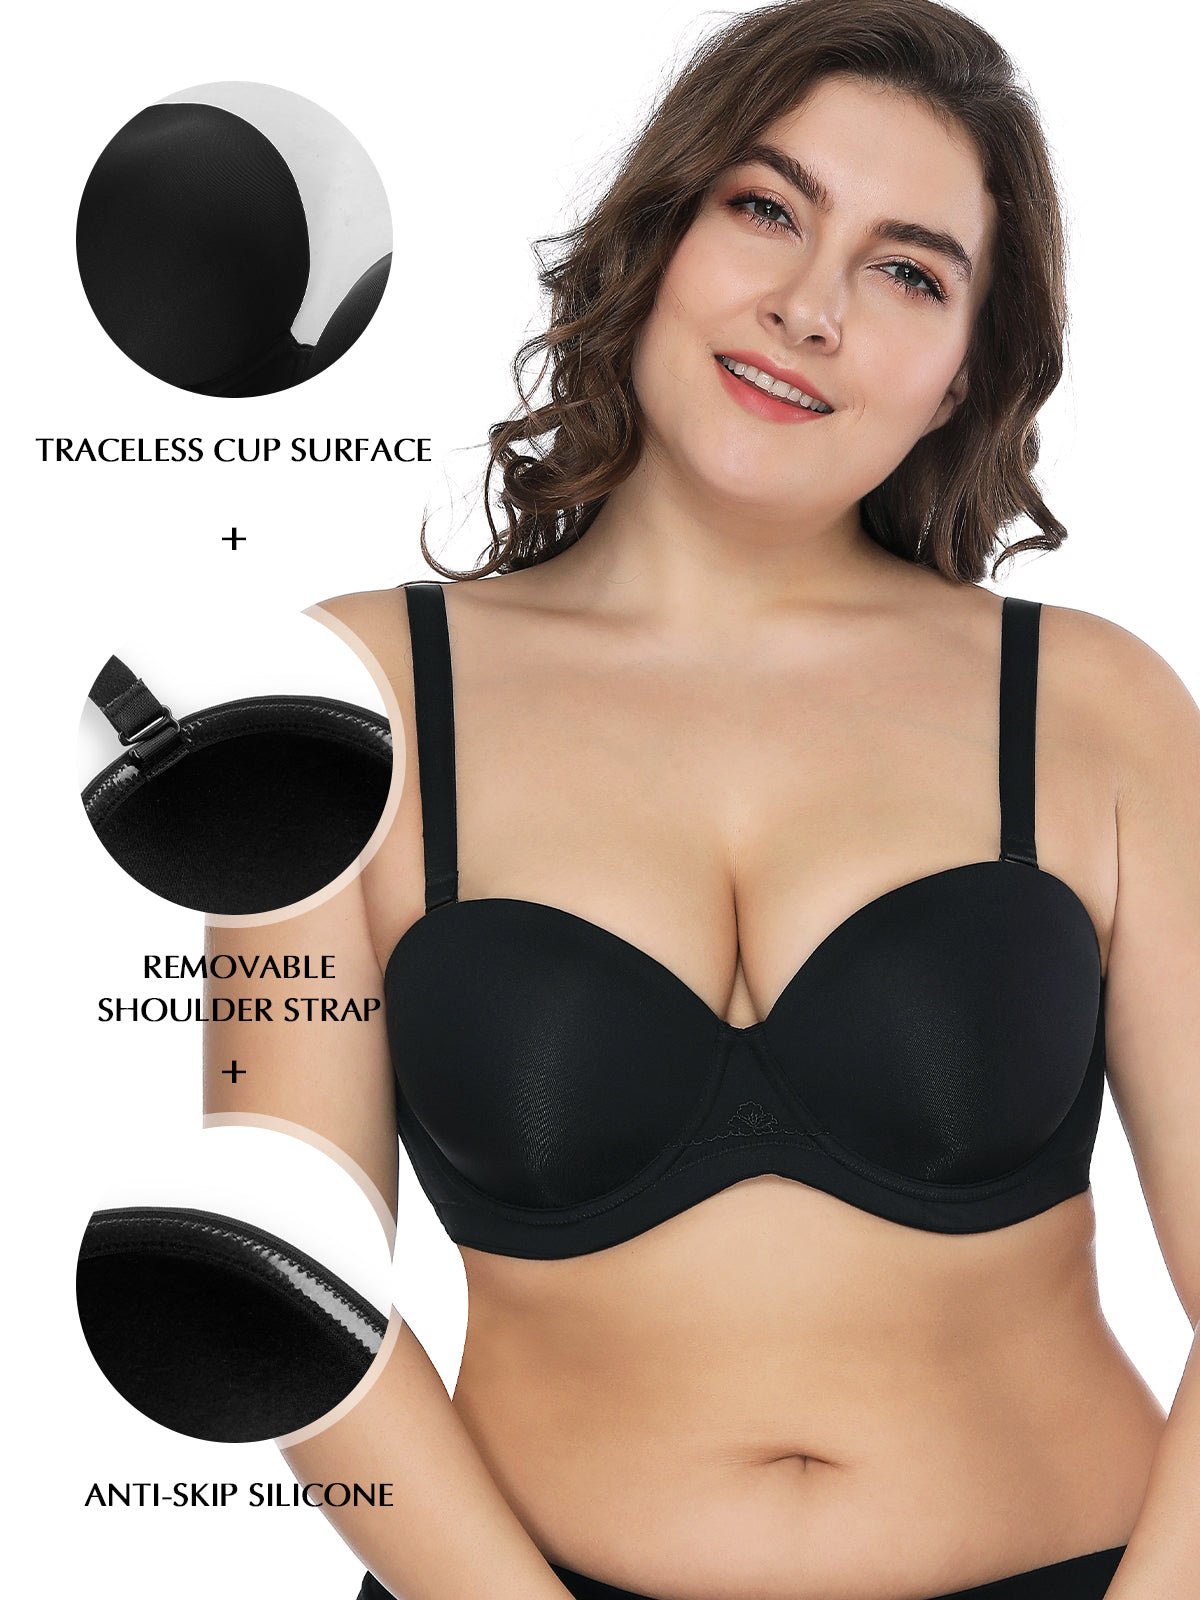 Wholesale size 36c breasts - Offering Lingerie For The Curvy Lady